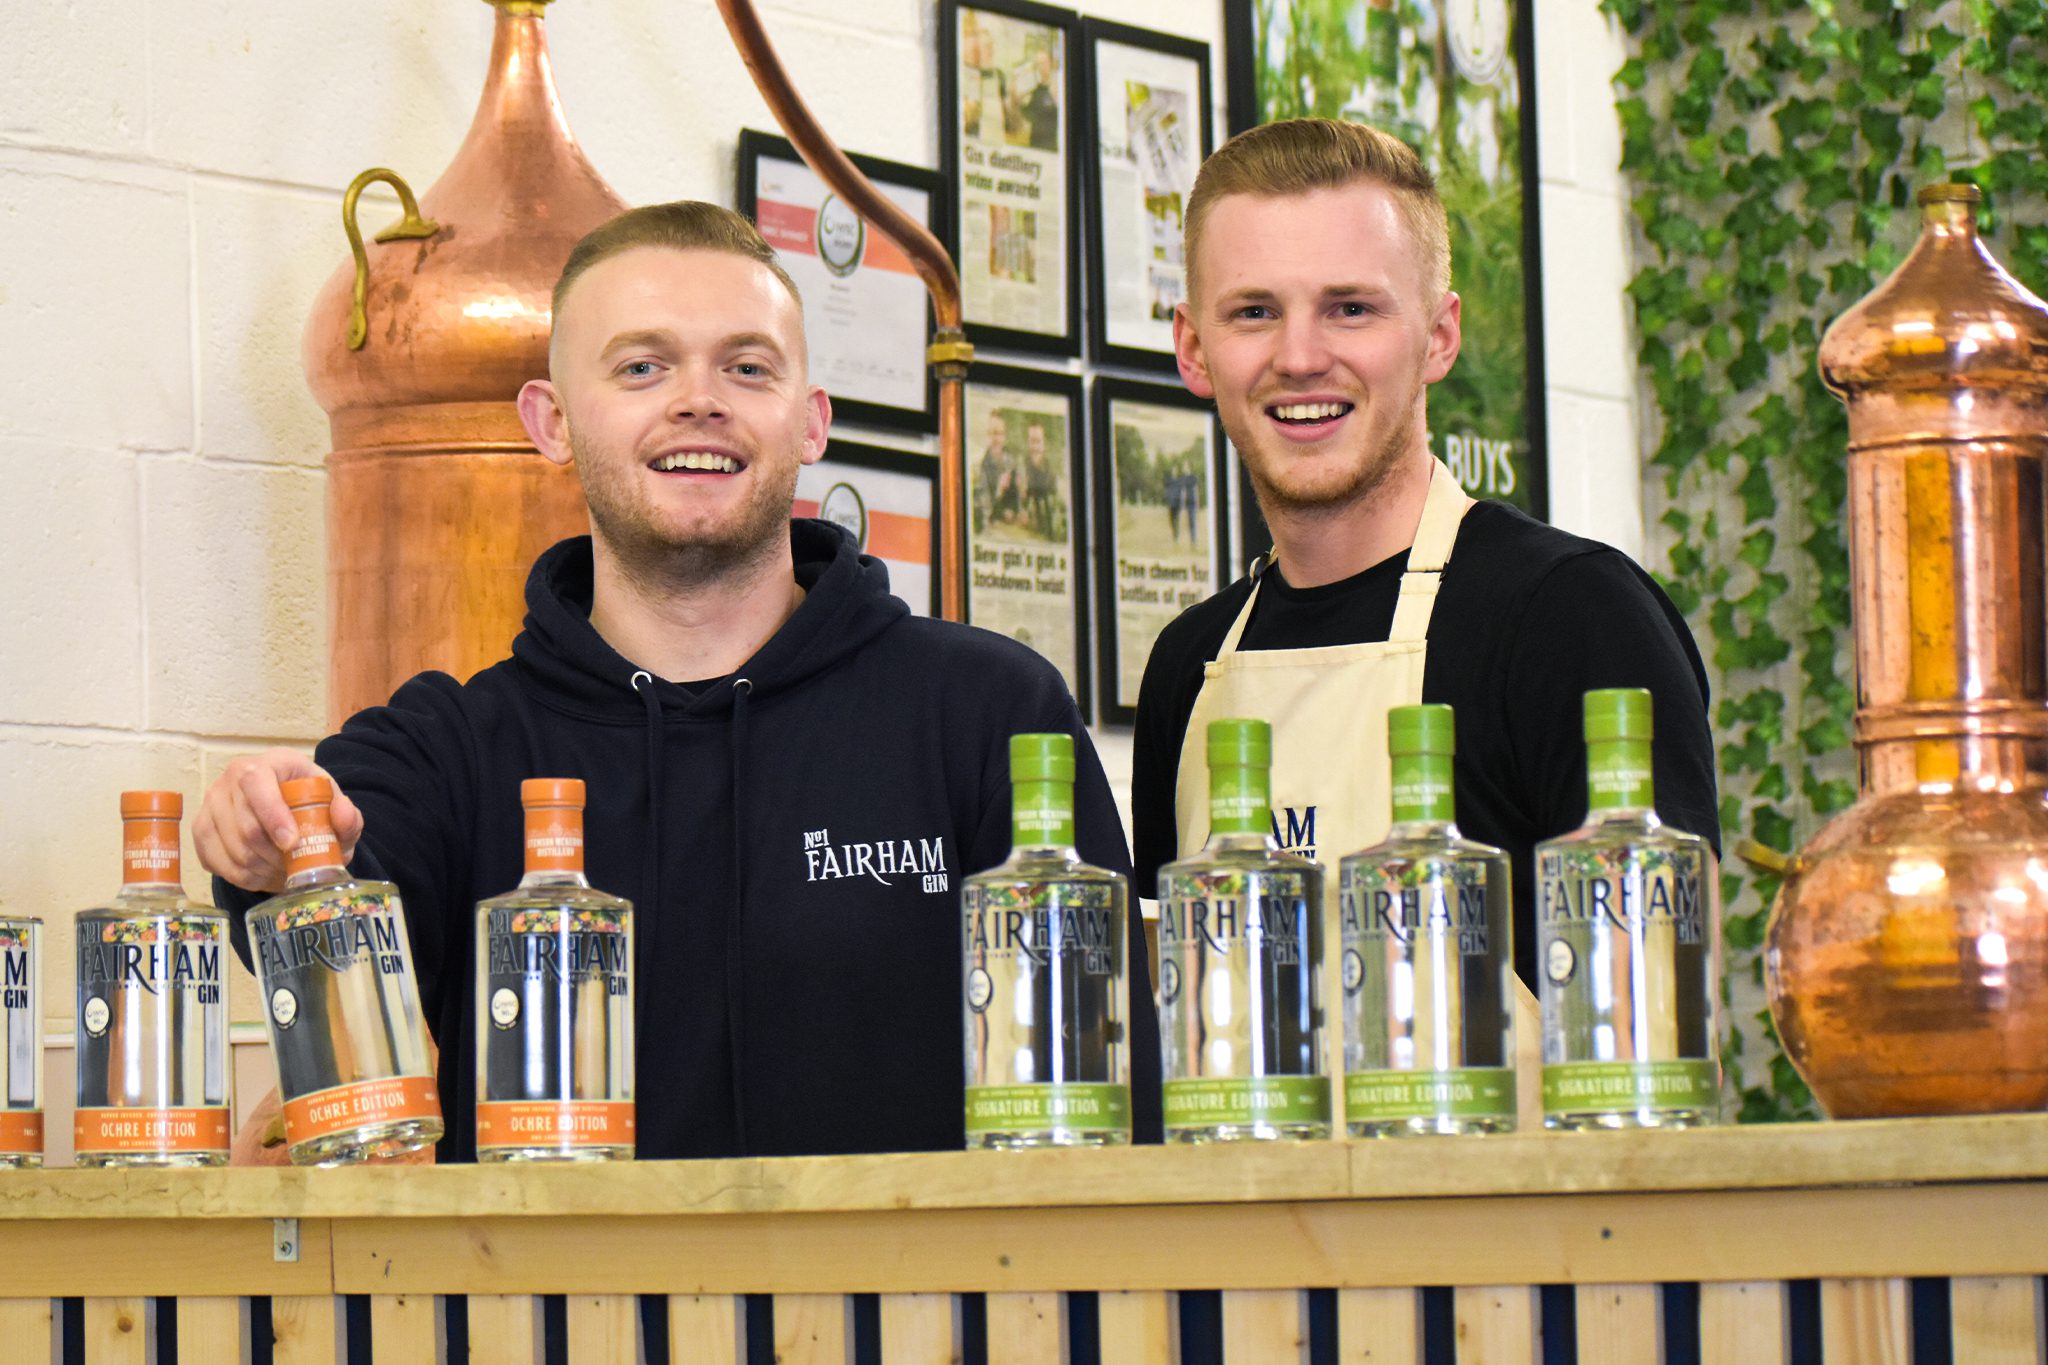 Multi-award-winning Lancashire distillery two of the youngest UK distillers